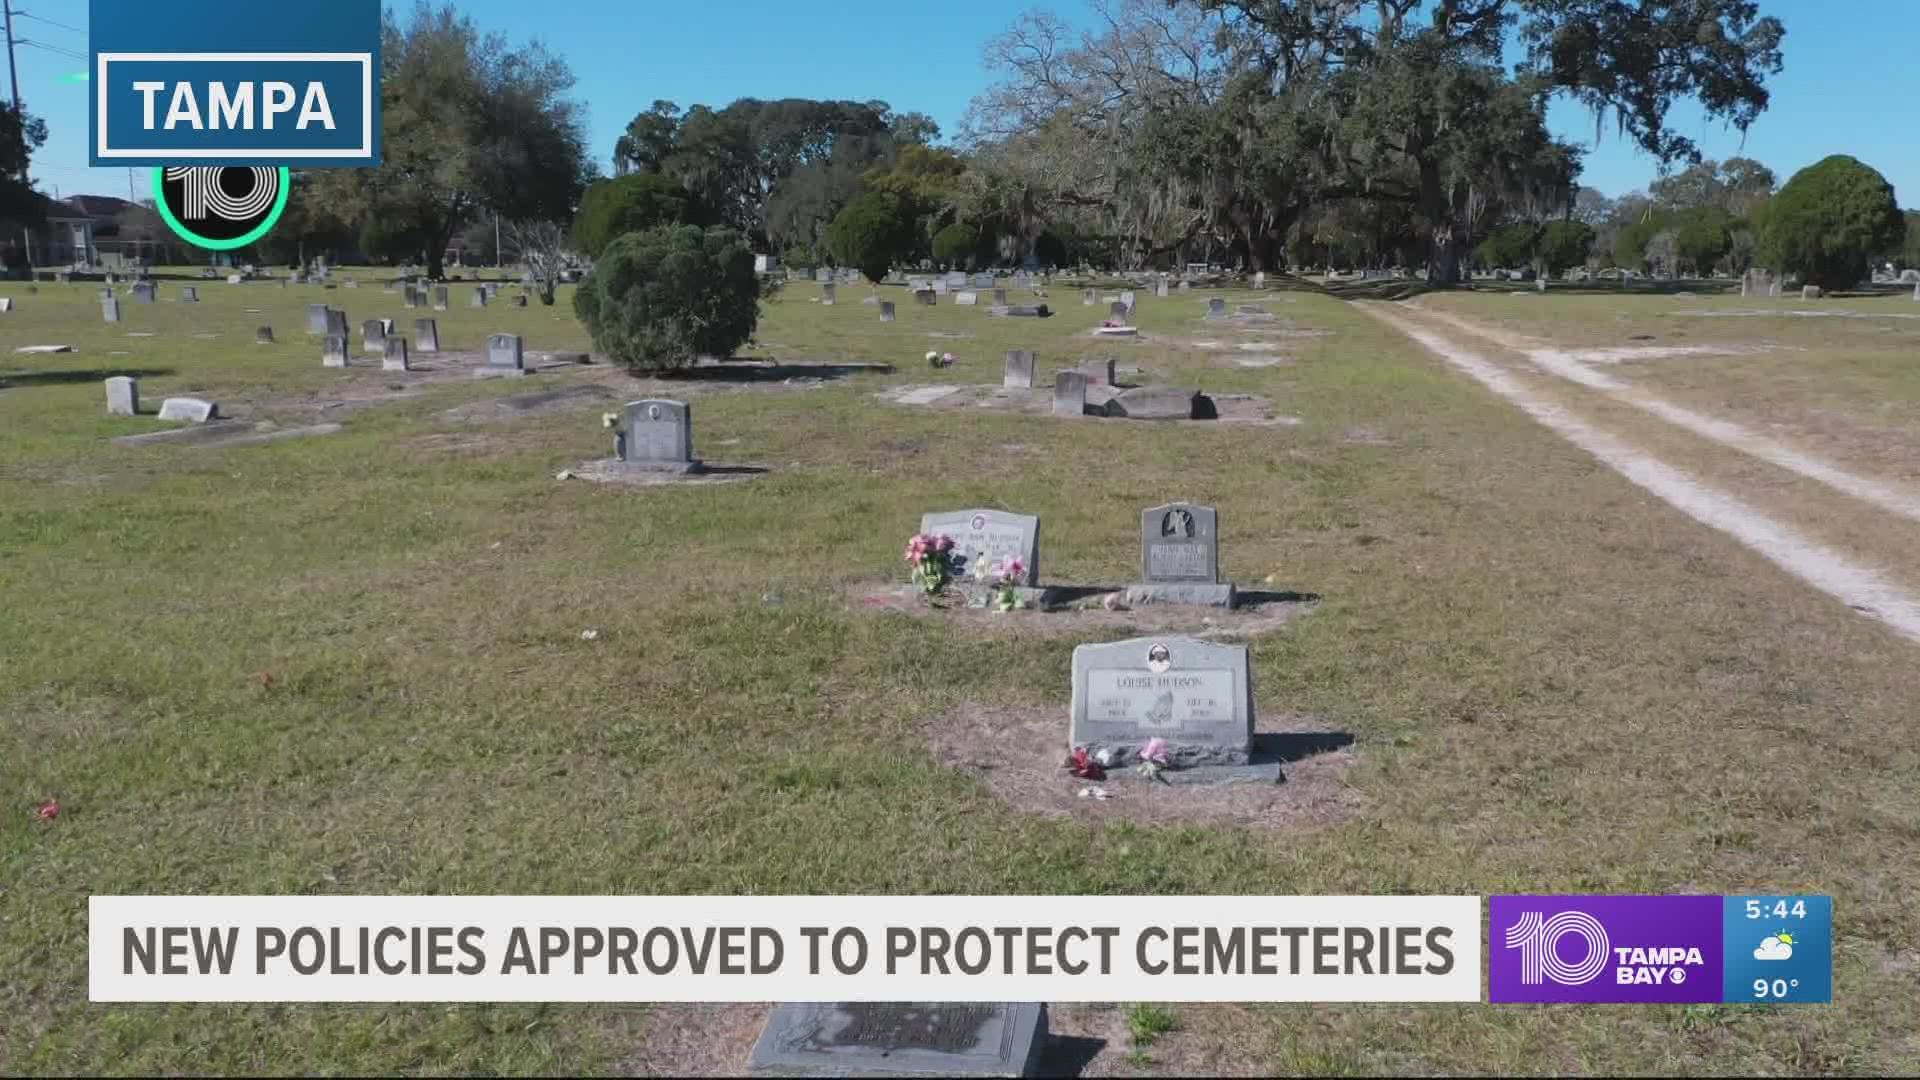 This comes after archaeologists found African-American cemeteries erased in the Tampa Bay area.